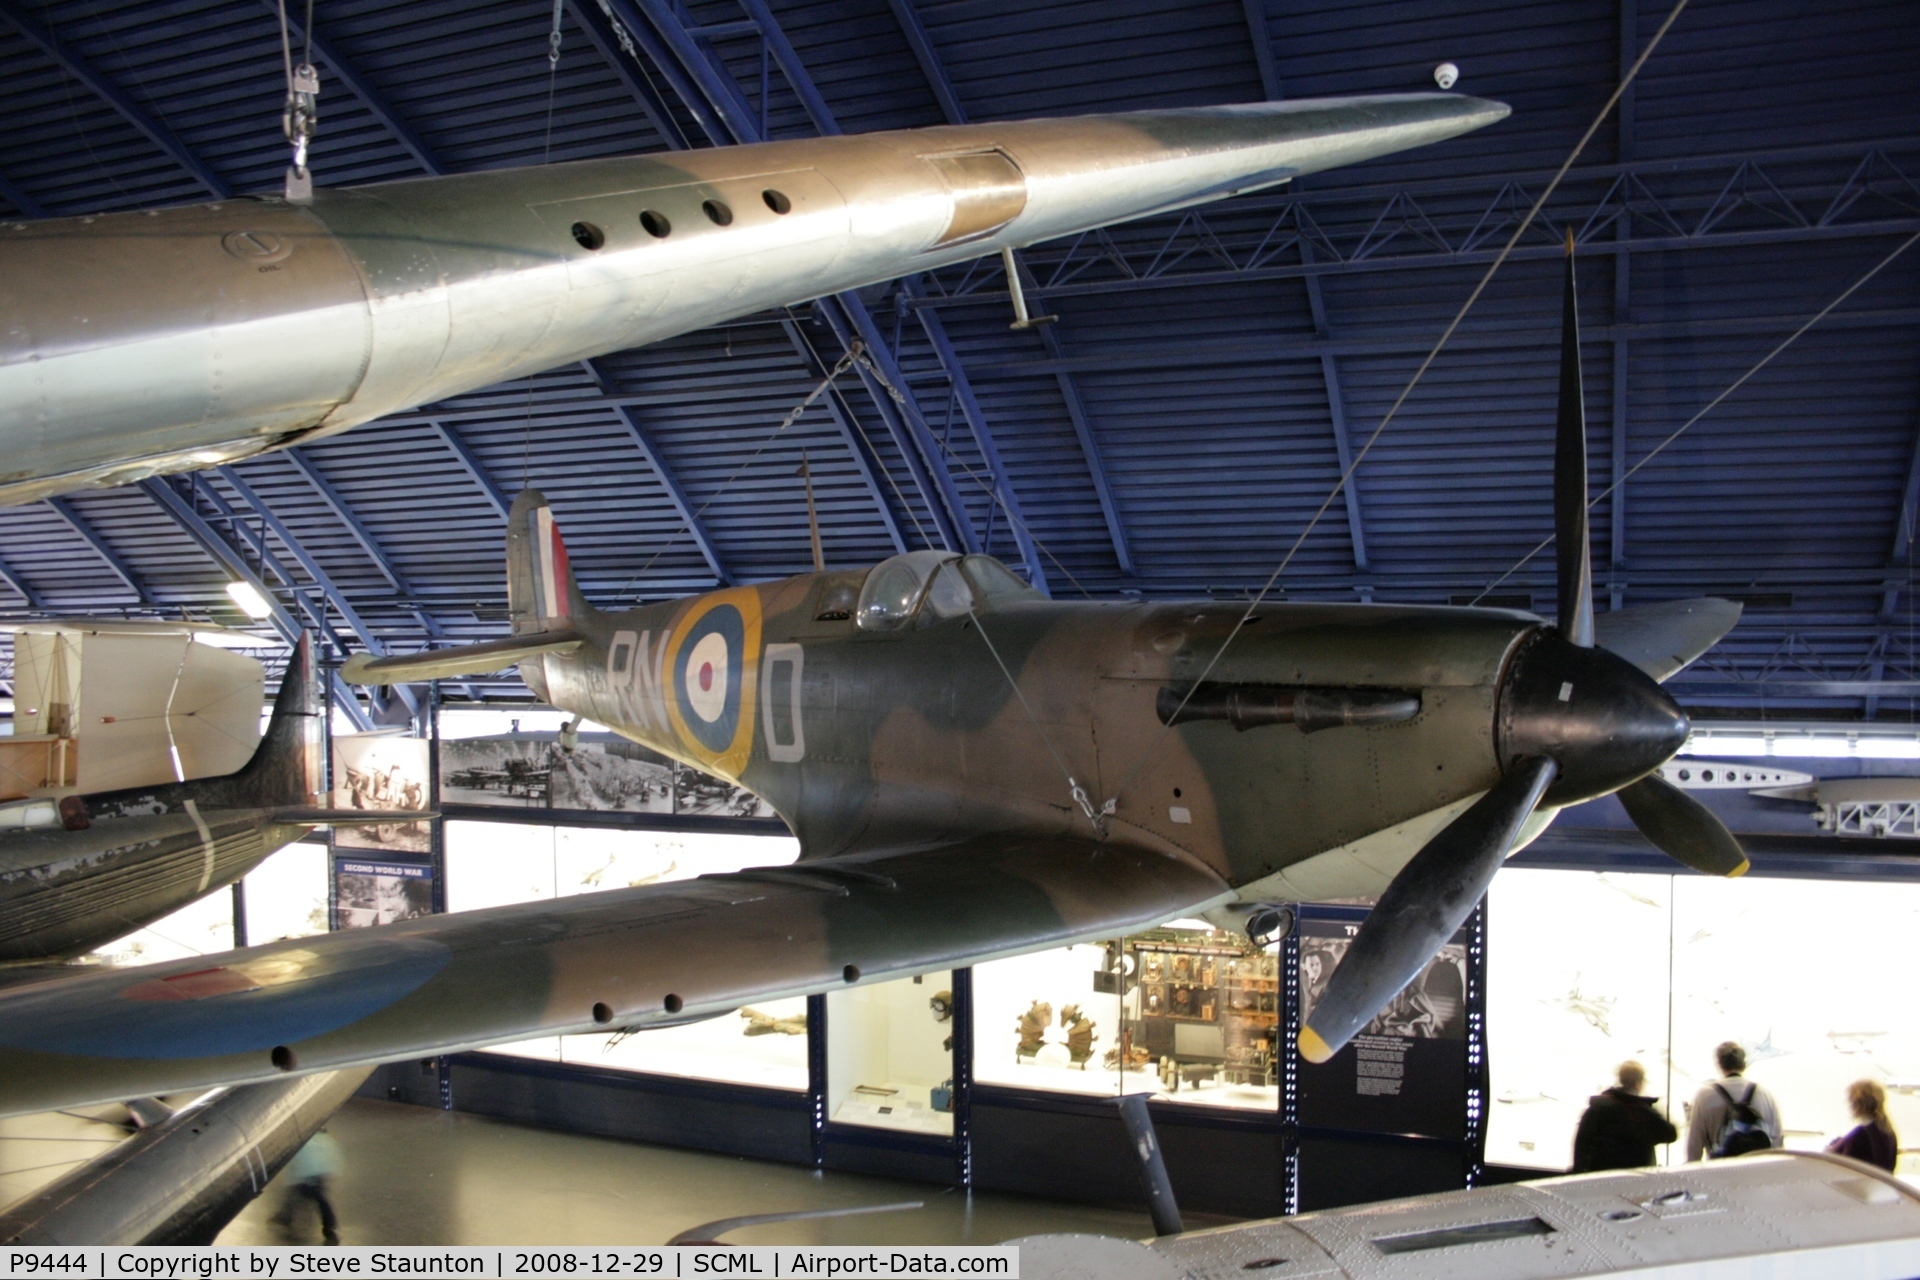 P9444, Supermarine 300 Spitfire Mk1A C/N 6S/30613, Taken at the Science Museum, London. December 2008